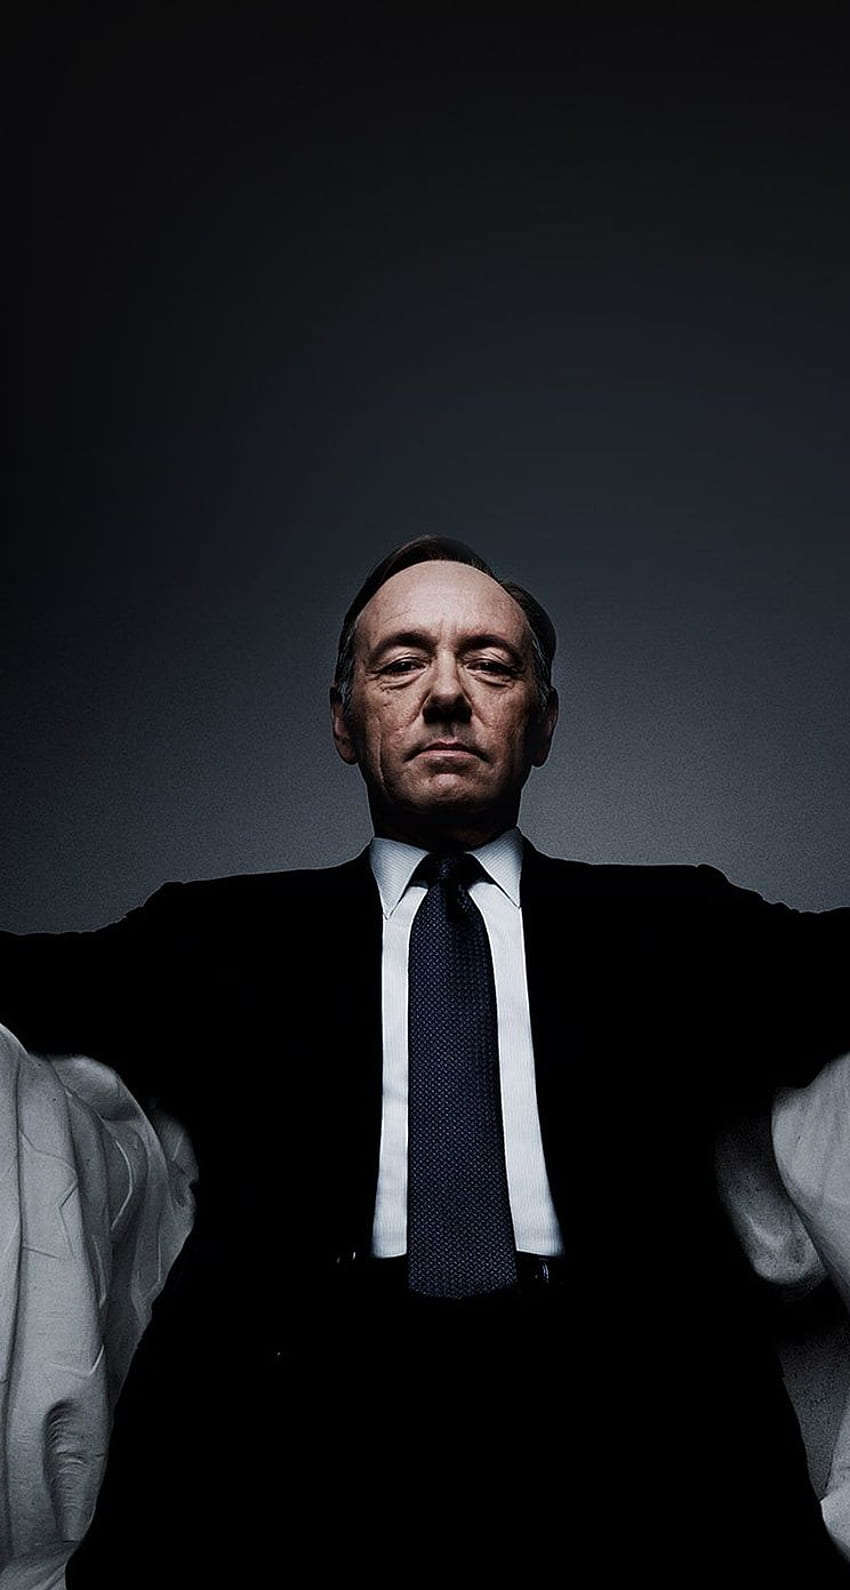 House of Cards - mobile9 iphone 5 . Kevin spacey, House of cards, Kevin HD phone wallpaper